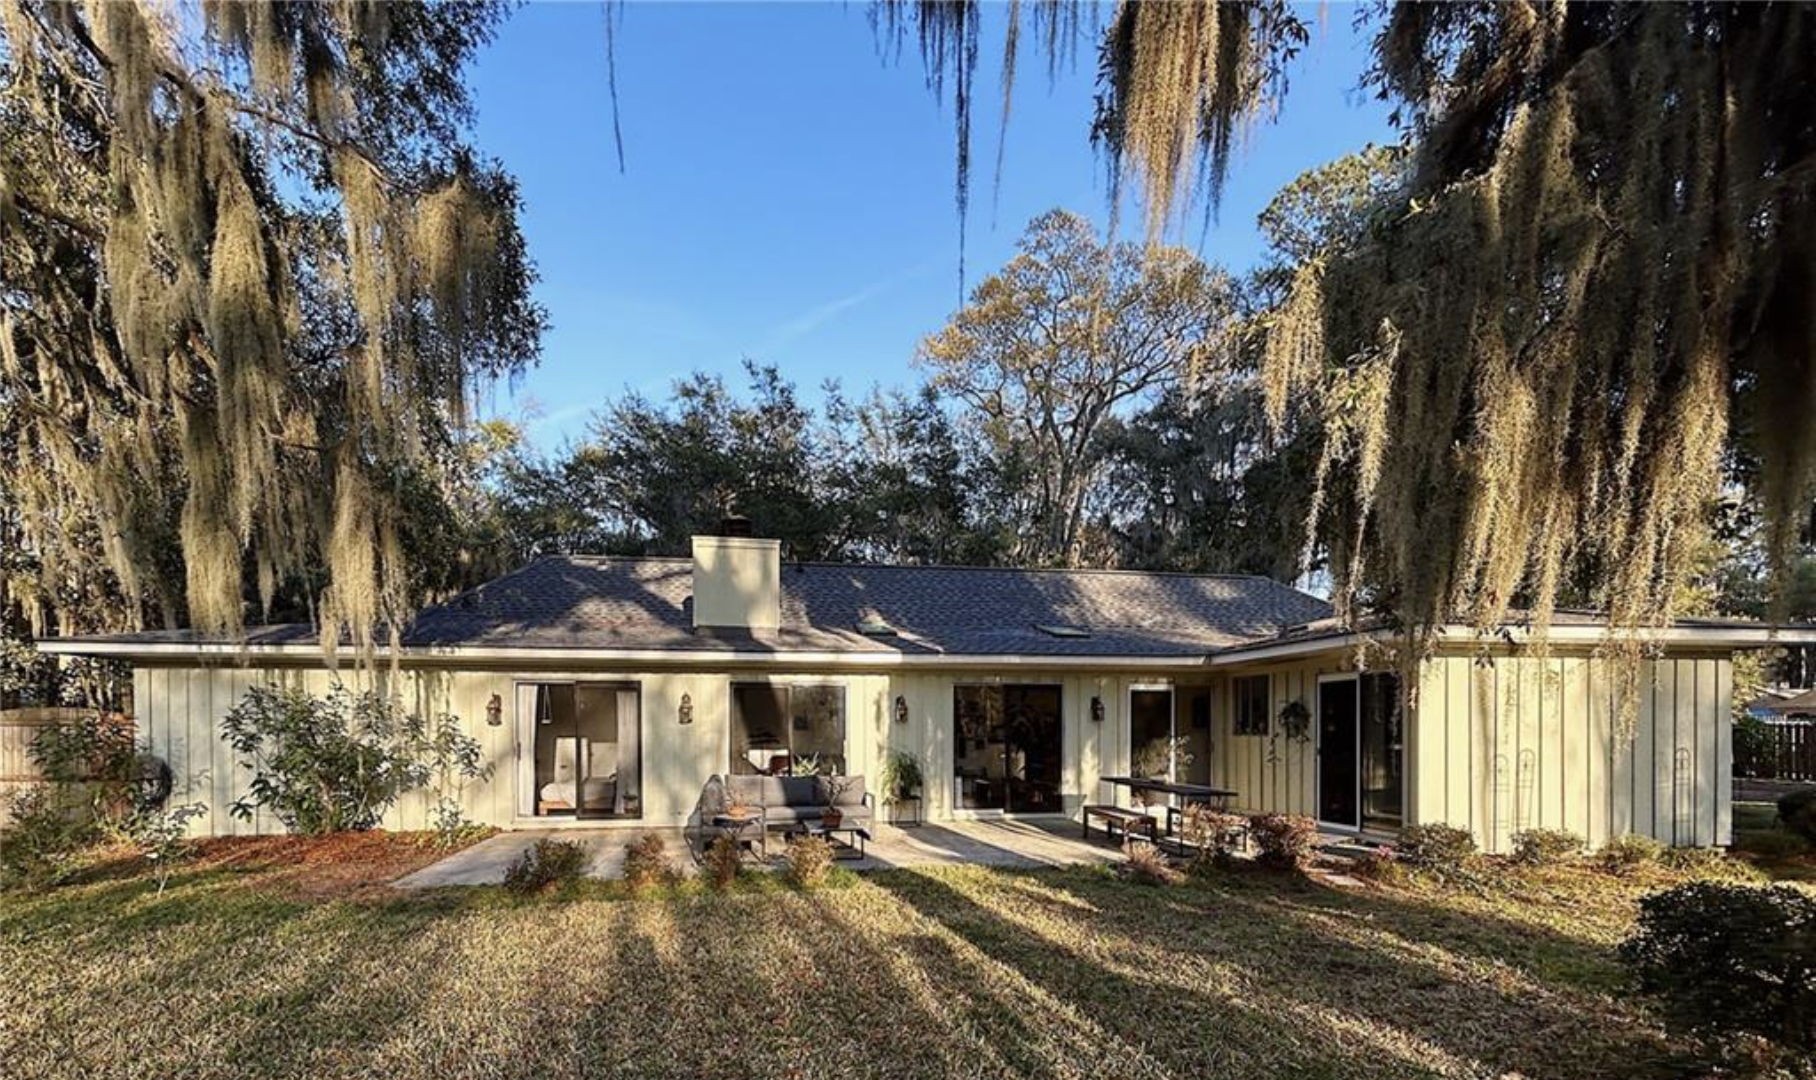 Featured image for “707 White Bluff Ave. | Savannah, GA 31419”